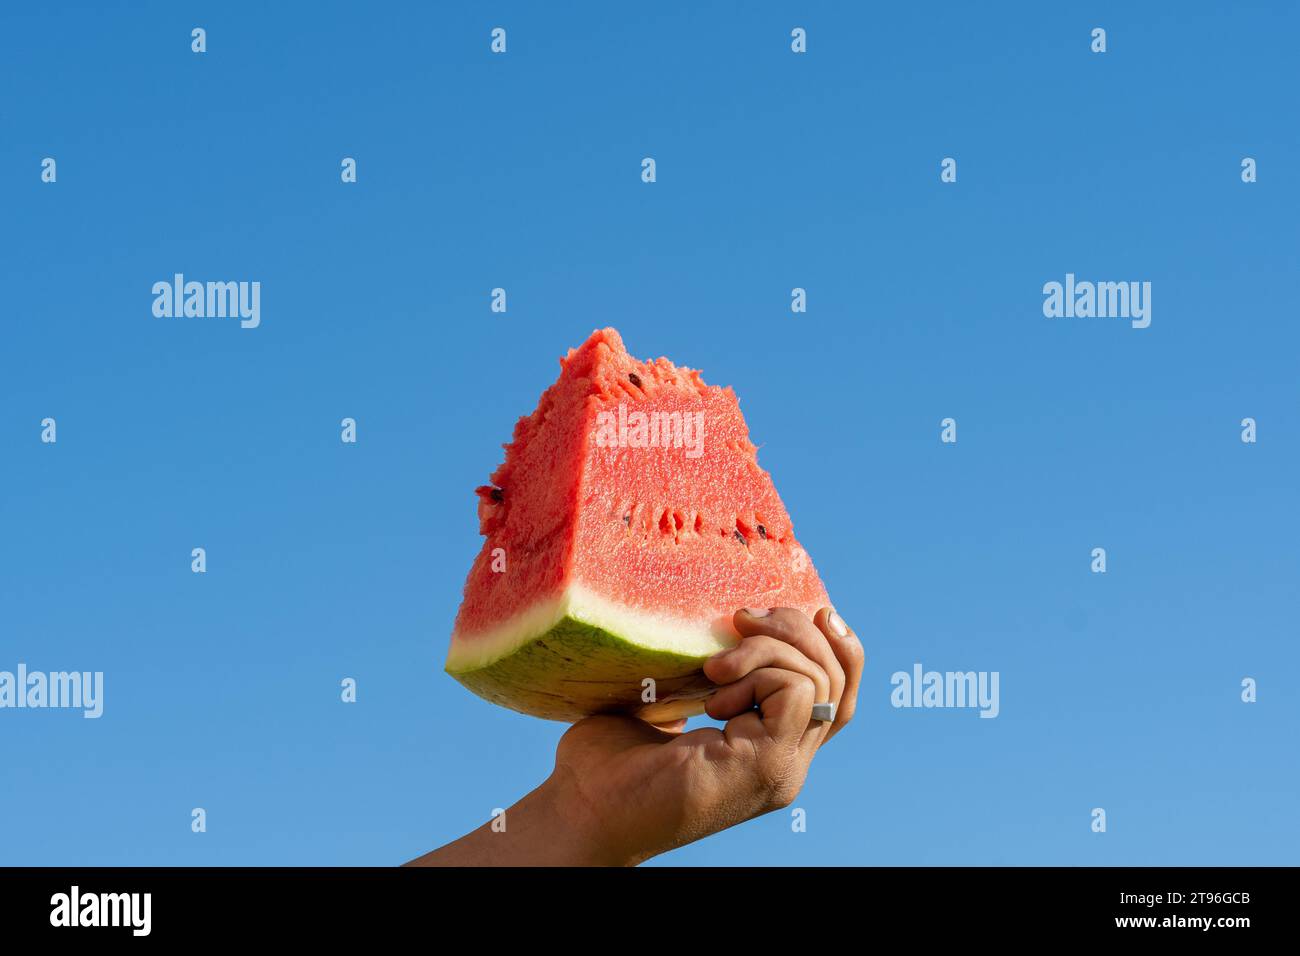 Close-up of a hand holding a slice of watermelon against a blue sky. Sign of resistance. Stock Photo